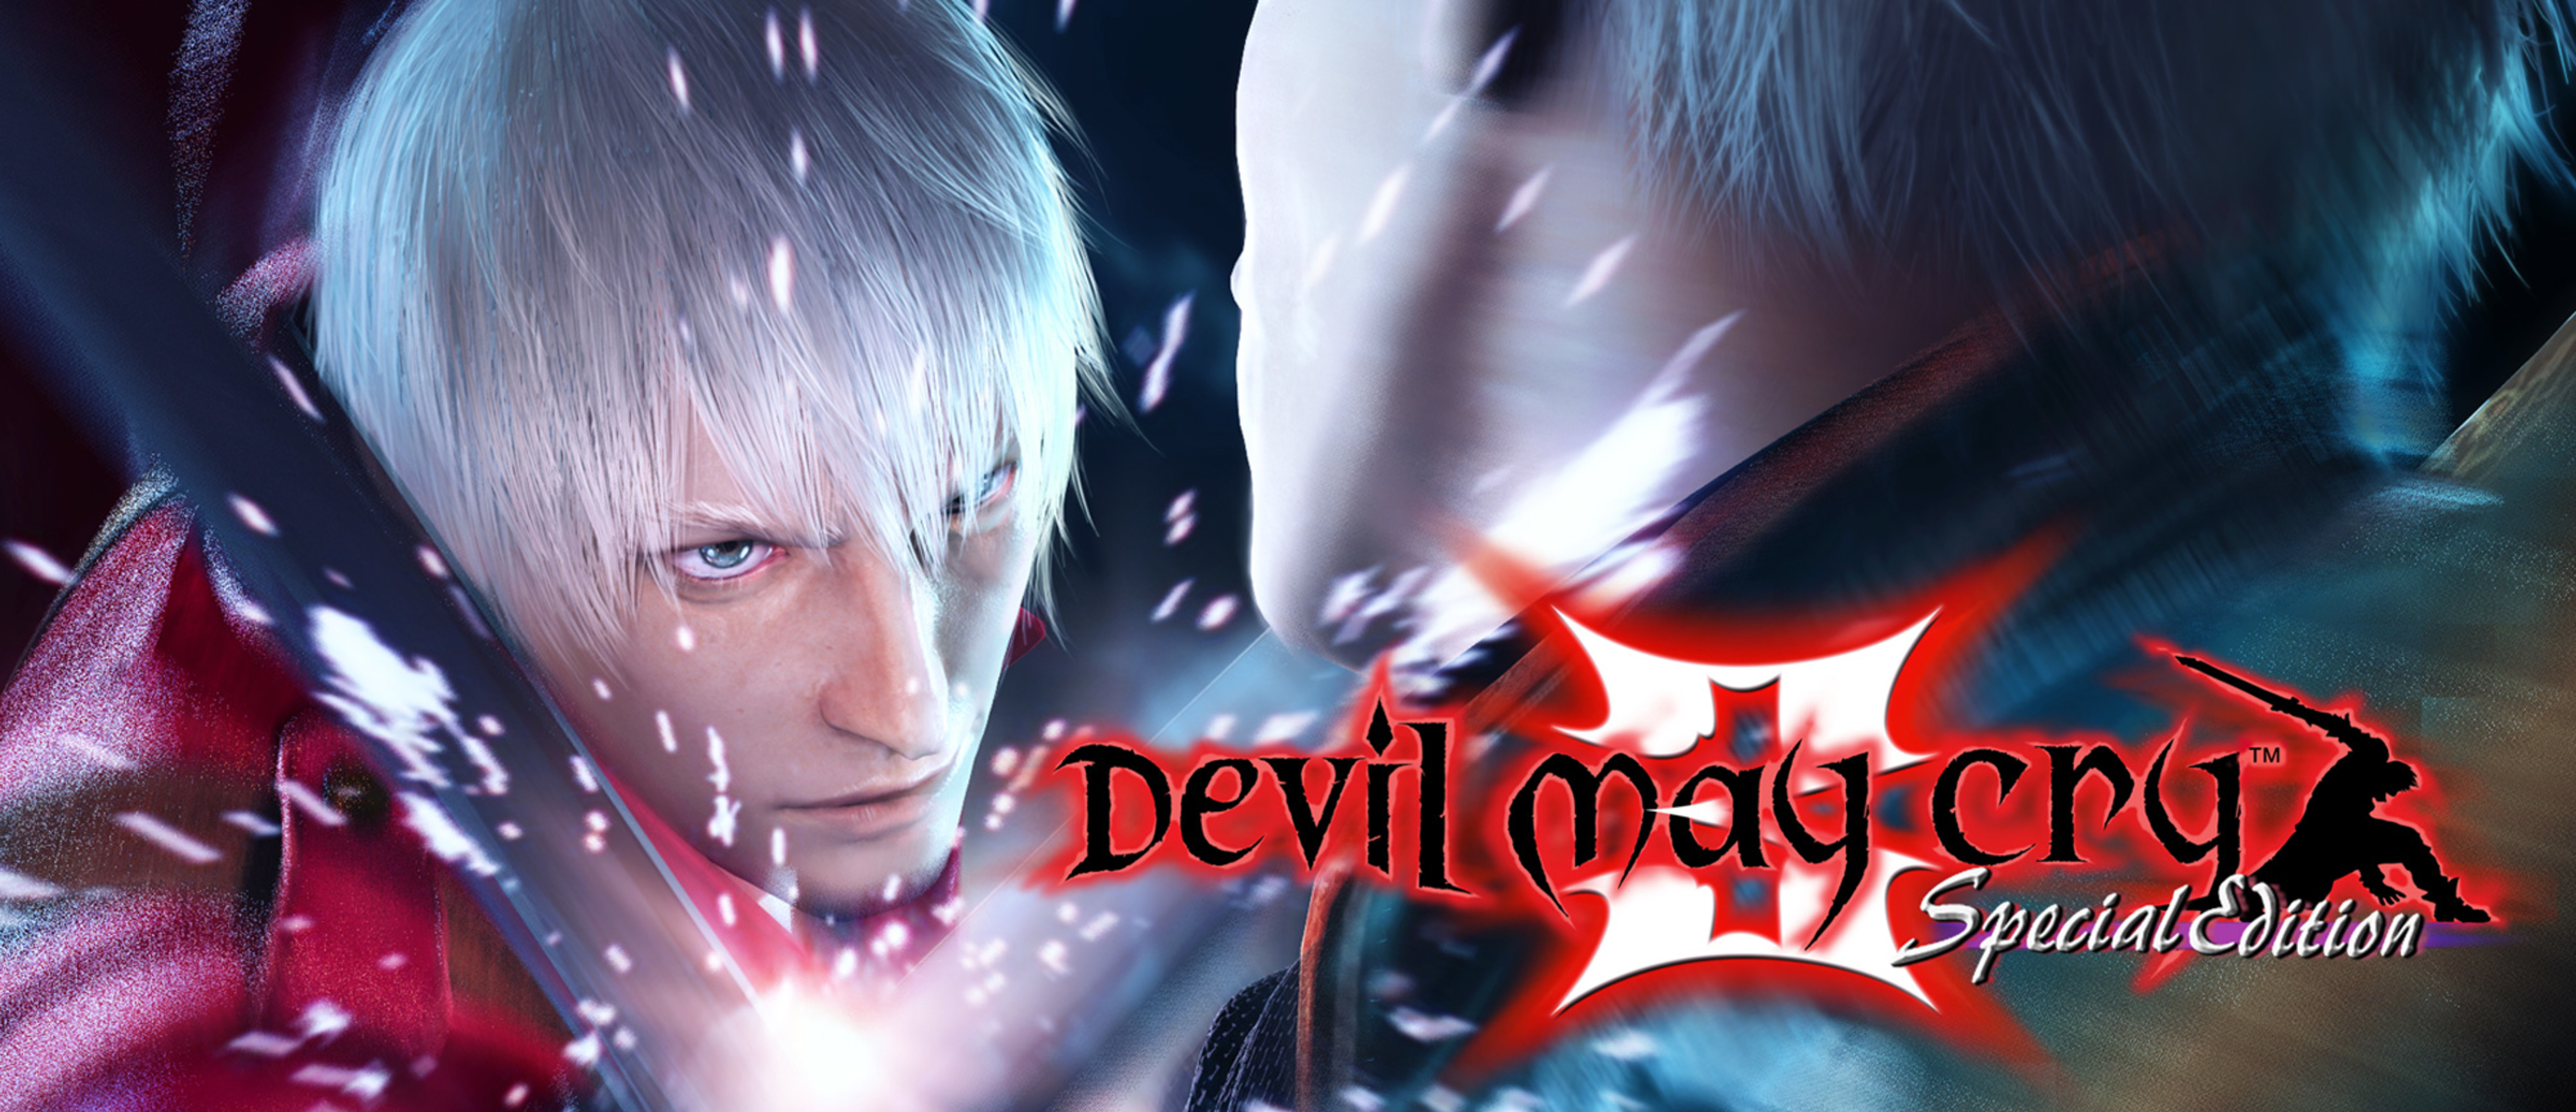 Ps3 devil may. DMC 3 Special Edition. Devil May Cry 3: Dante's Awakening Special Edition. Devil May Cry 3 Special Edition PC. Devil May Cry 3 Special Edition ps2.